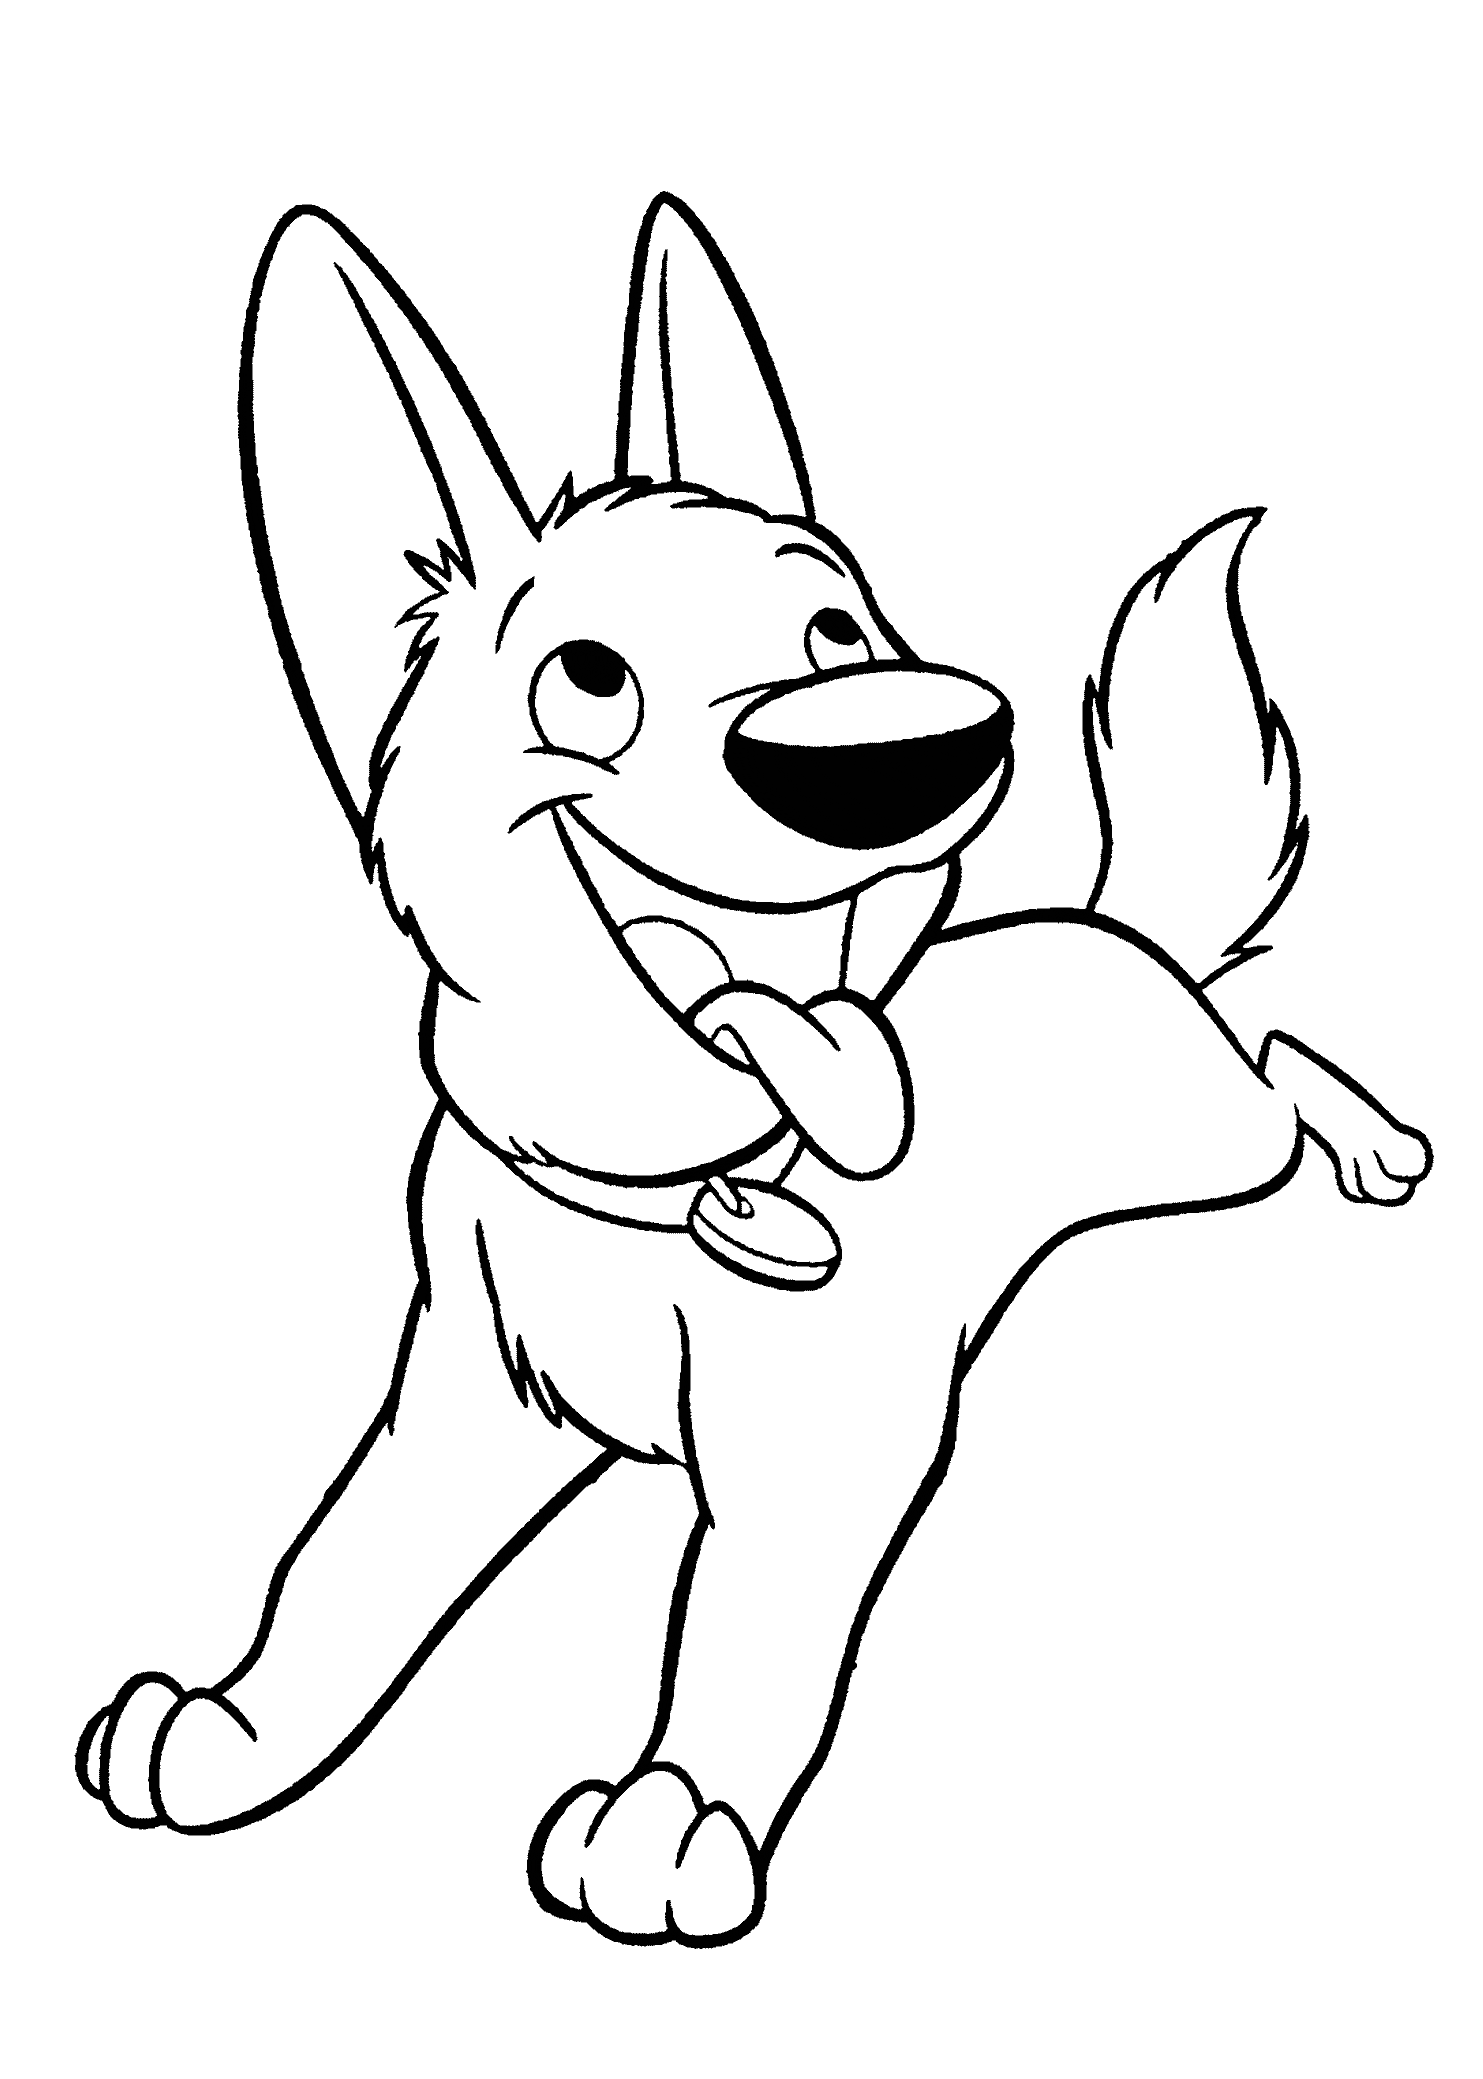 Bolt Coloring Pages   Best Coloring Pages For Kids